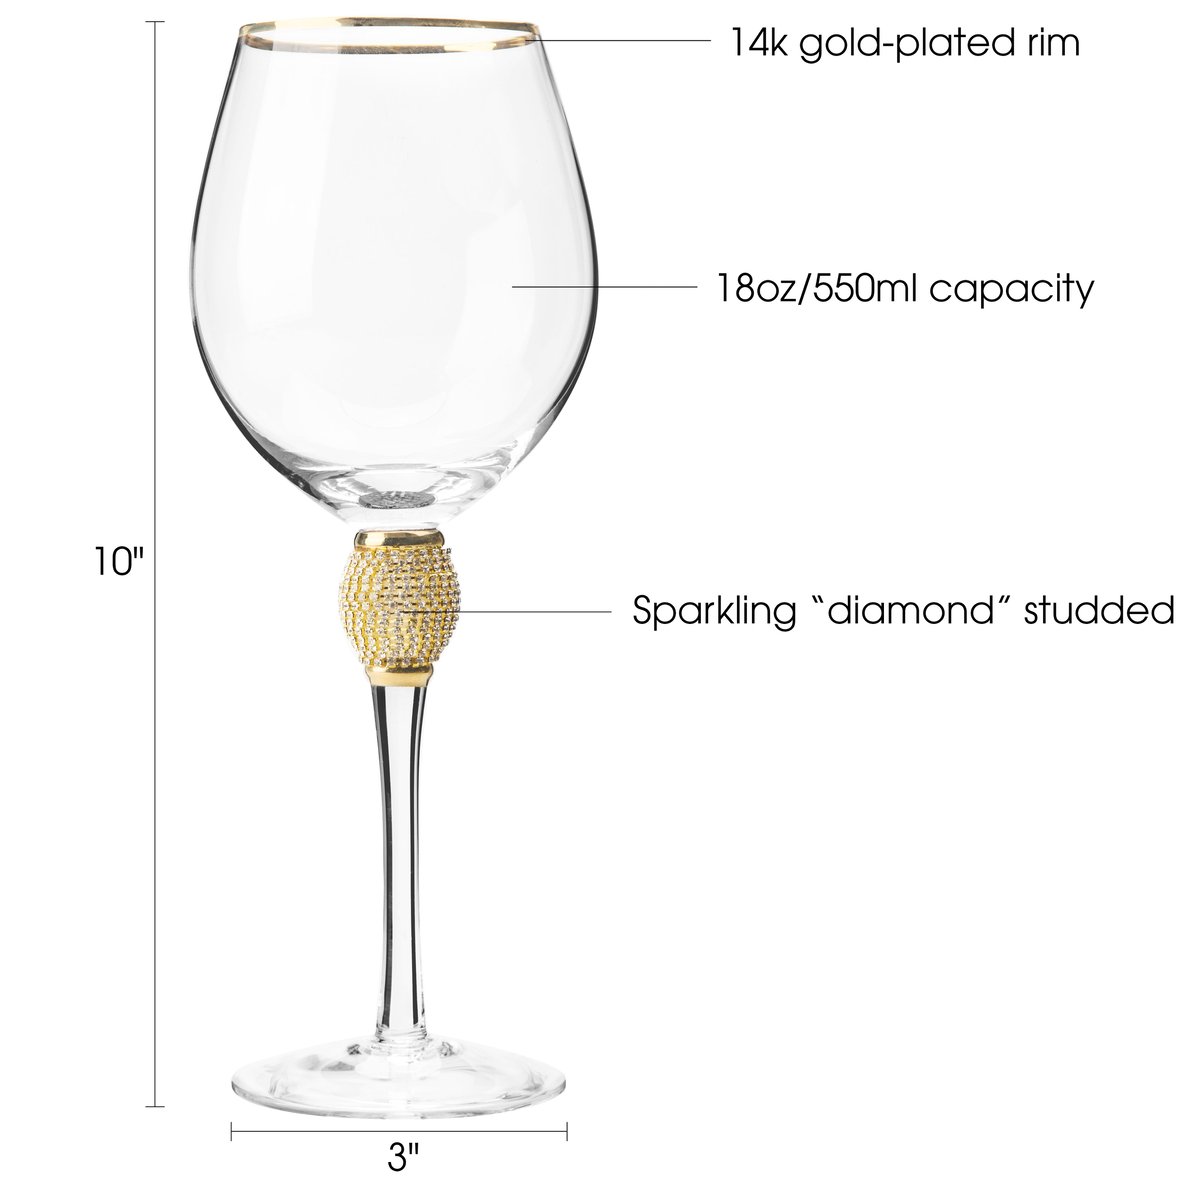 https://images.verishop.com/berkware-luxurious-and-elegant-sparkling-studded-long-stem-red-wine-glass-with-gold-tone-rim-set-of-6-wine-glasses/M00810026170560-3127181370?auto=format&cs=strip&fit=max&w=1200